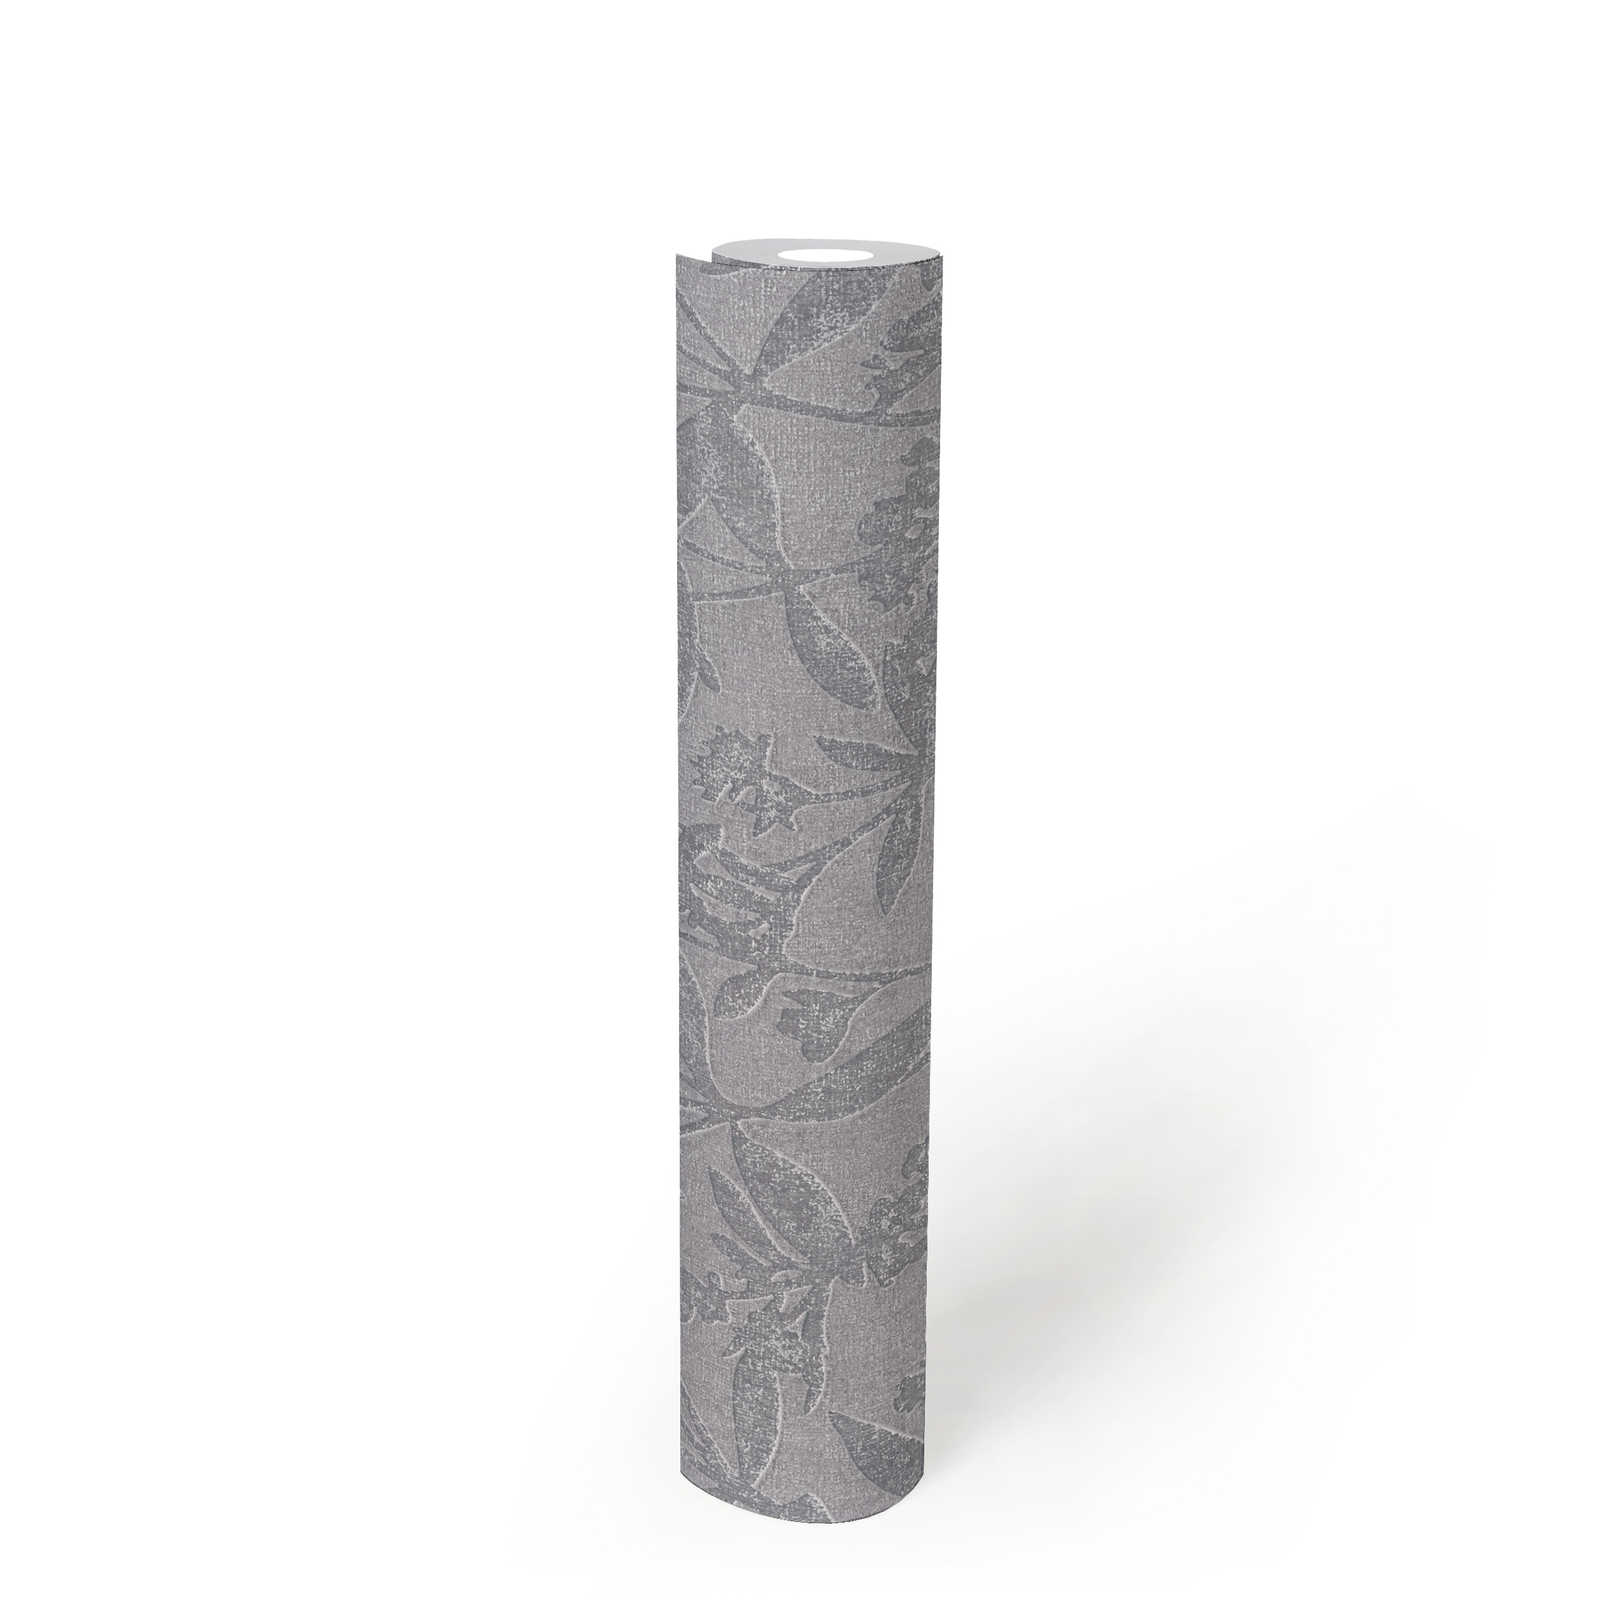             Floral non-woven wallpaper with floral textured pattern - grey, blue
        